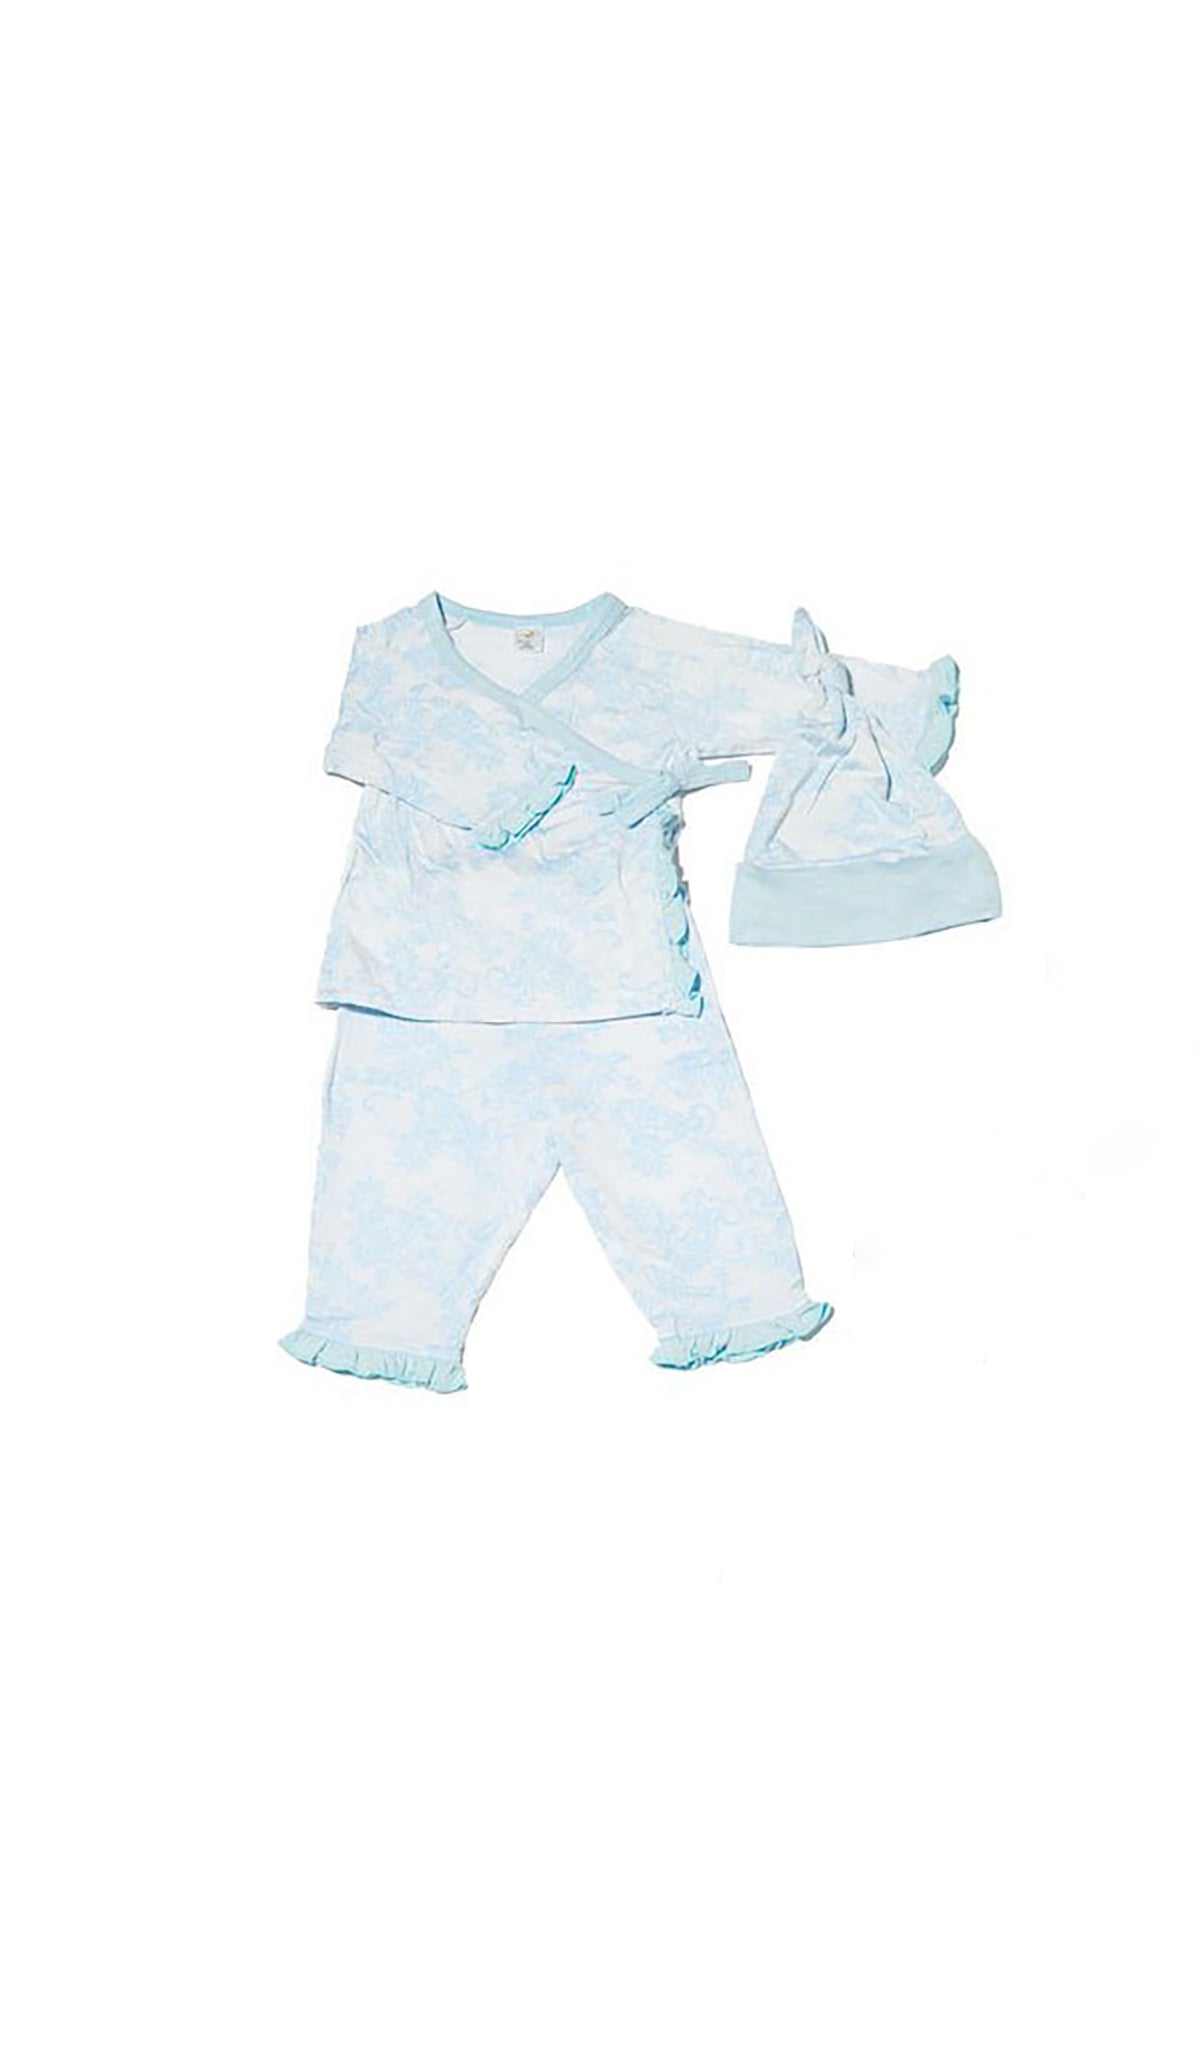 Blue Chantilly Baby's Ruffle Take-Me-Home 3 Piece set flat shot showing long sleeve kimono top and pant with ruffle trim, and matching knotted baby hat.